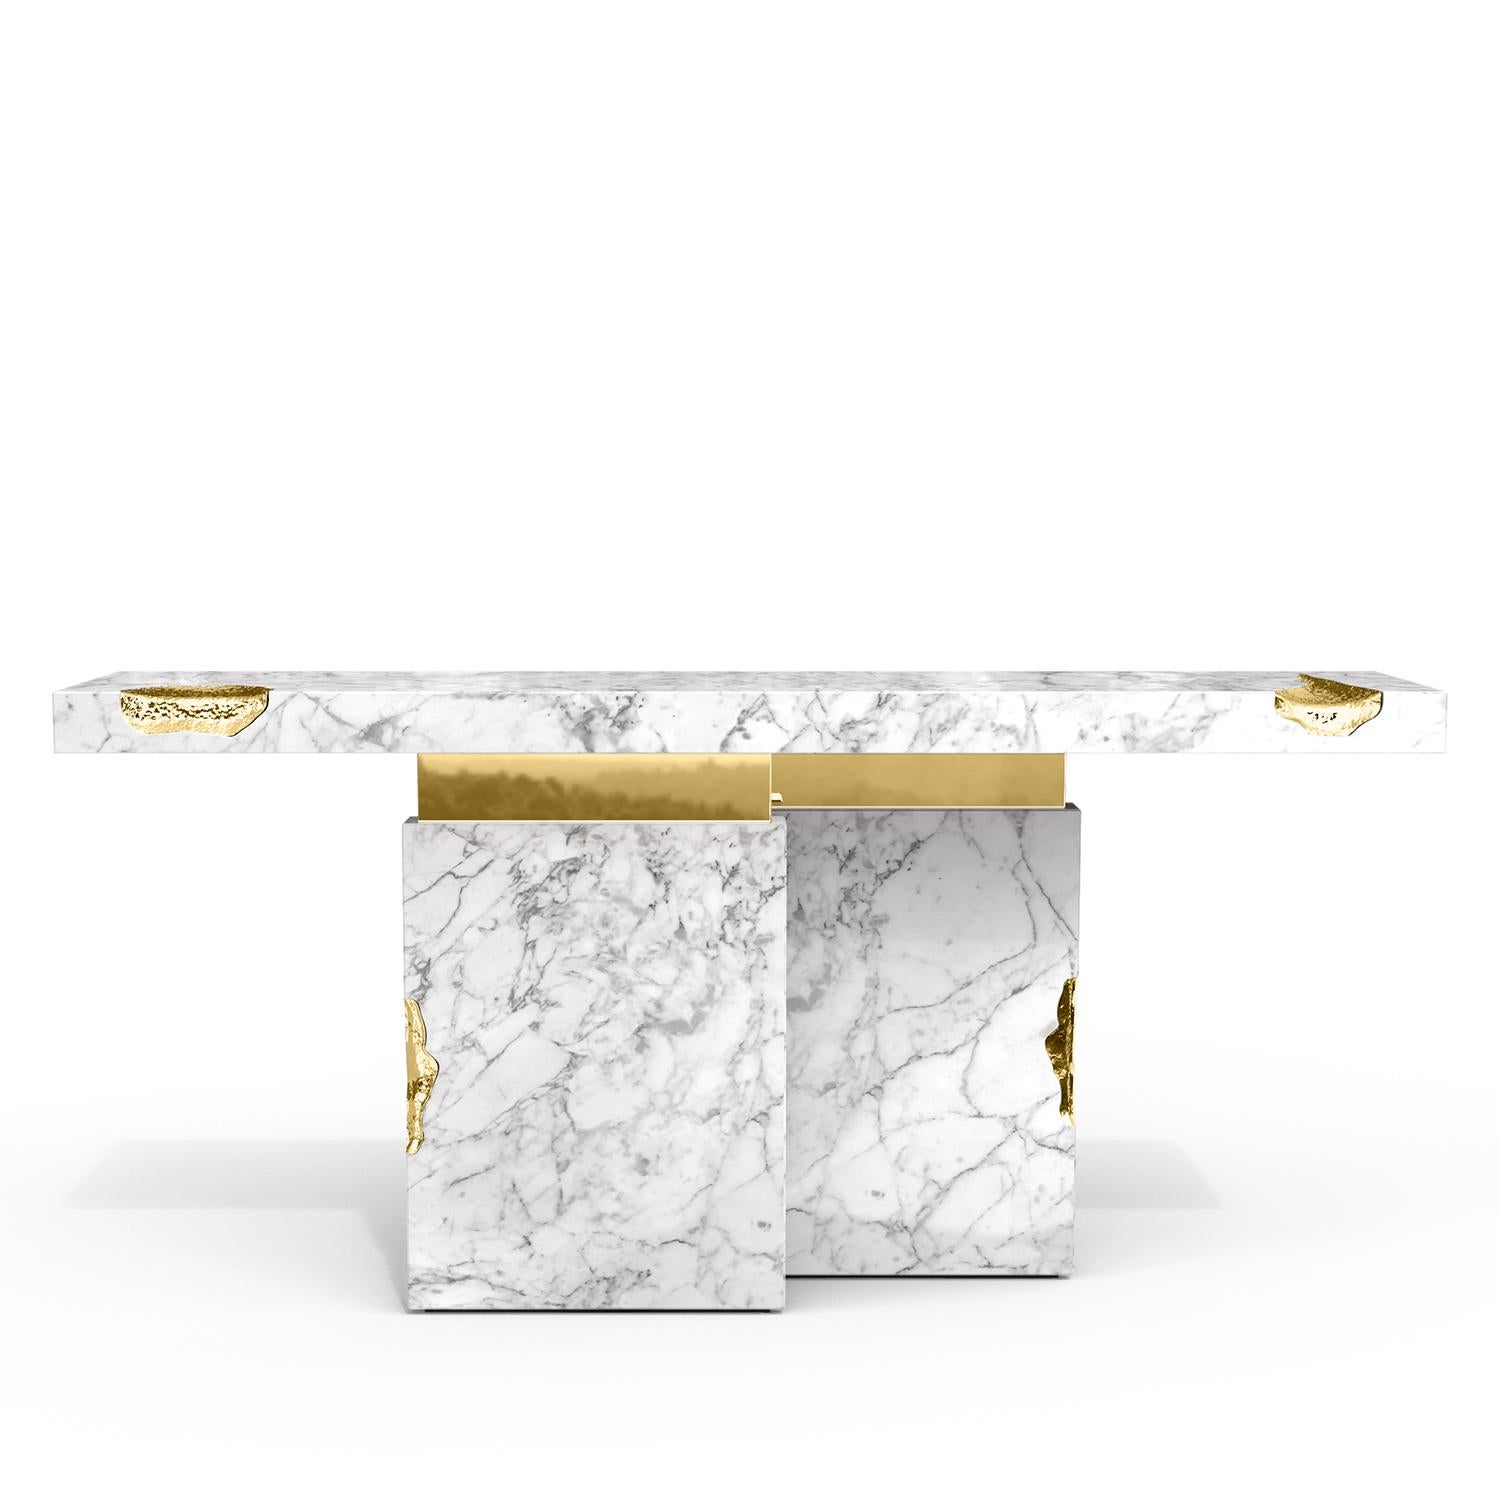 Console table Majestic white with emperador brown 
marquina marble, carved and polished. With solid polished 
brass and with hammered solid brass.